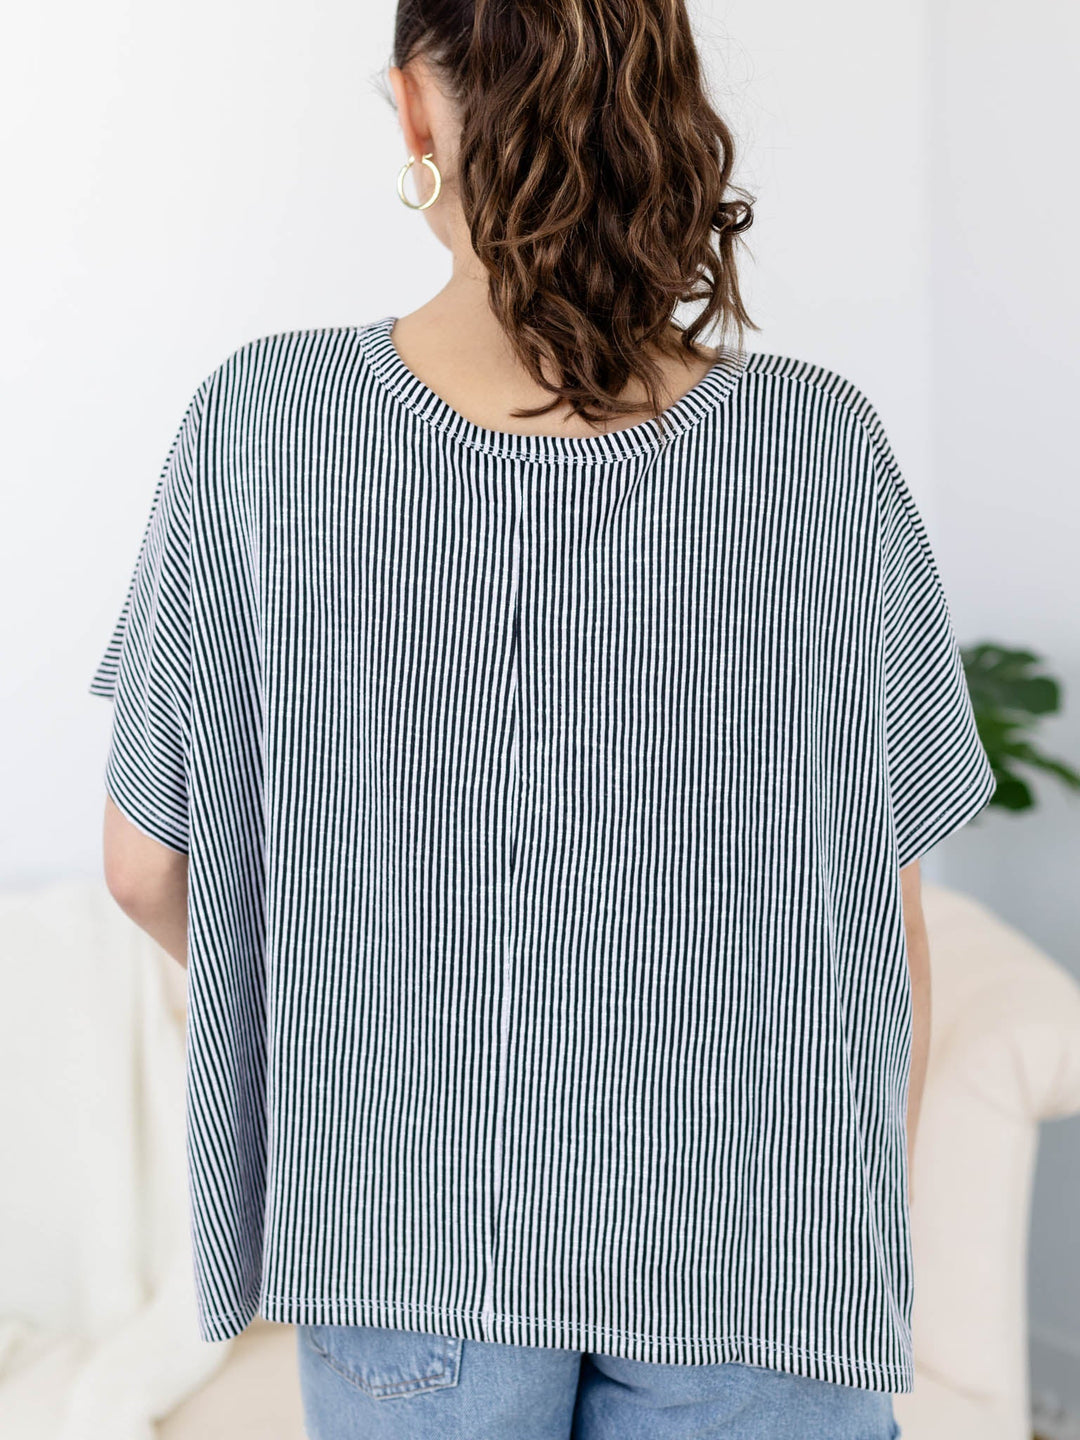 Ribbed Striped Oversized Short Sleeve TopKnit tops